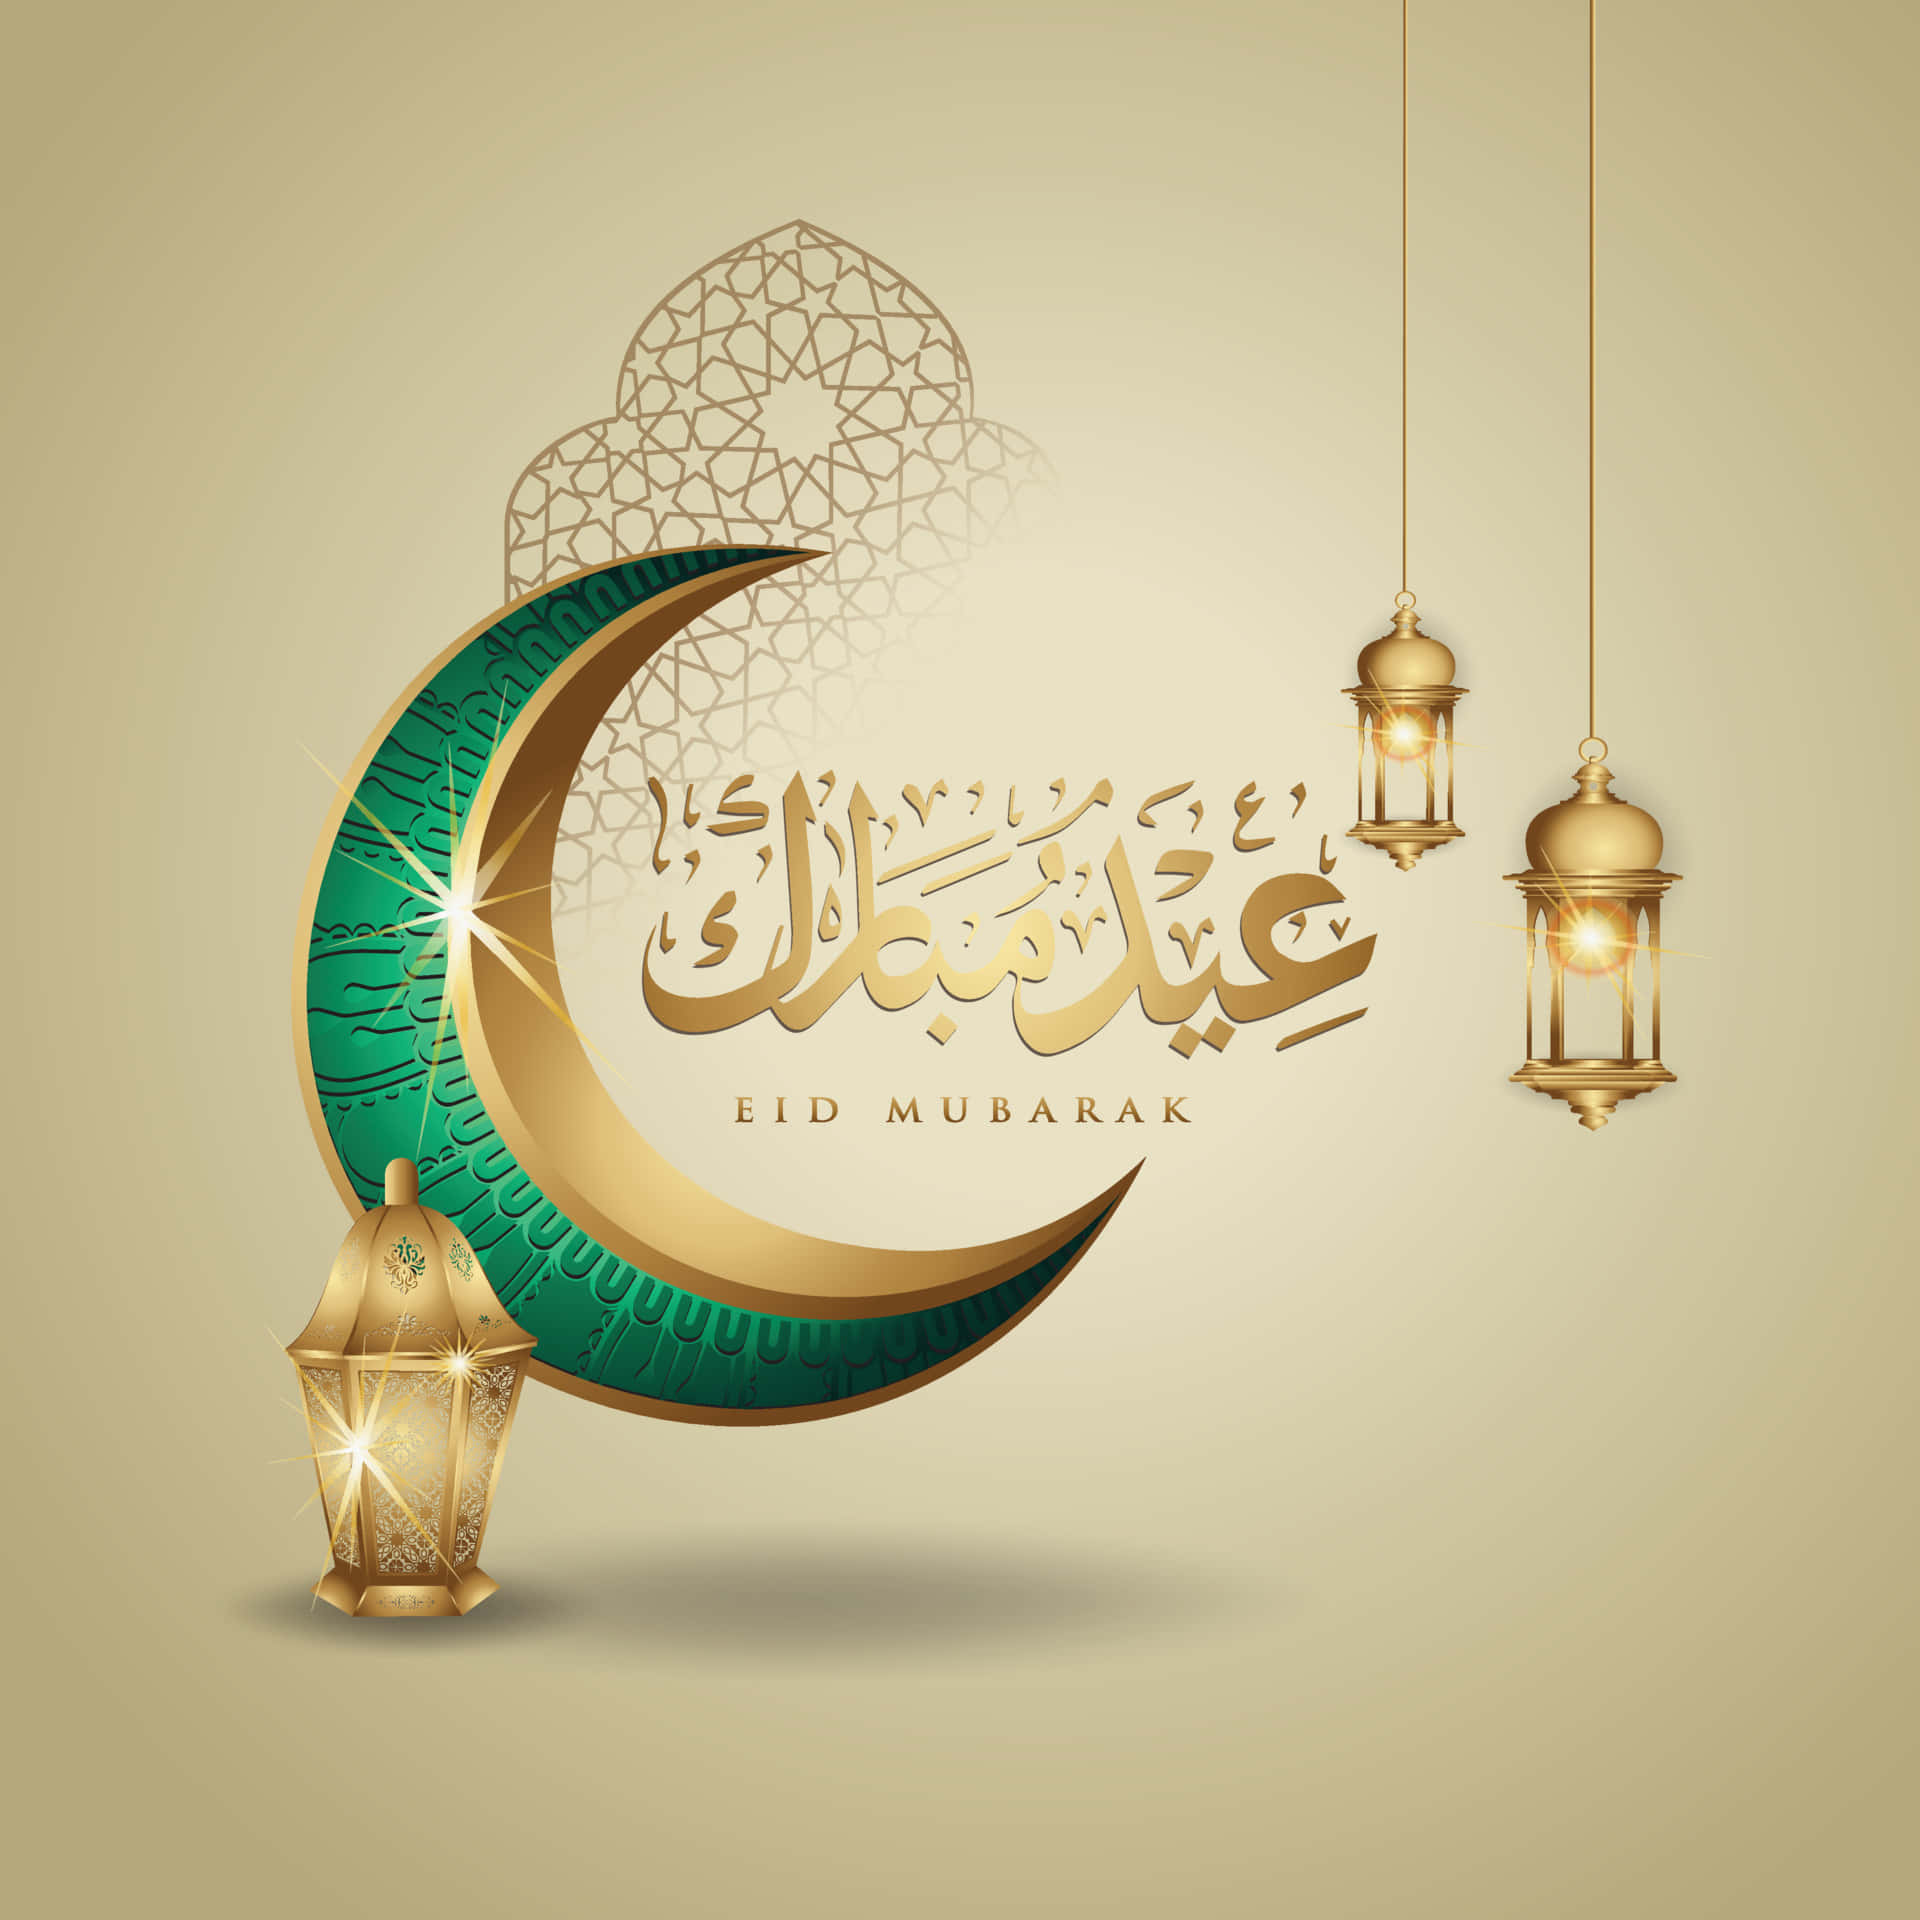 Download 'Wishing everyone a safe, blessed and joyous Eid Mubarak ...